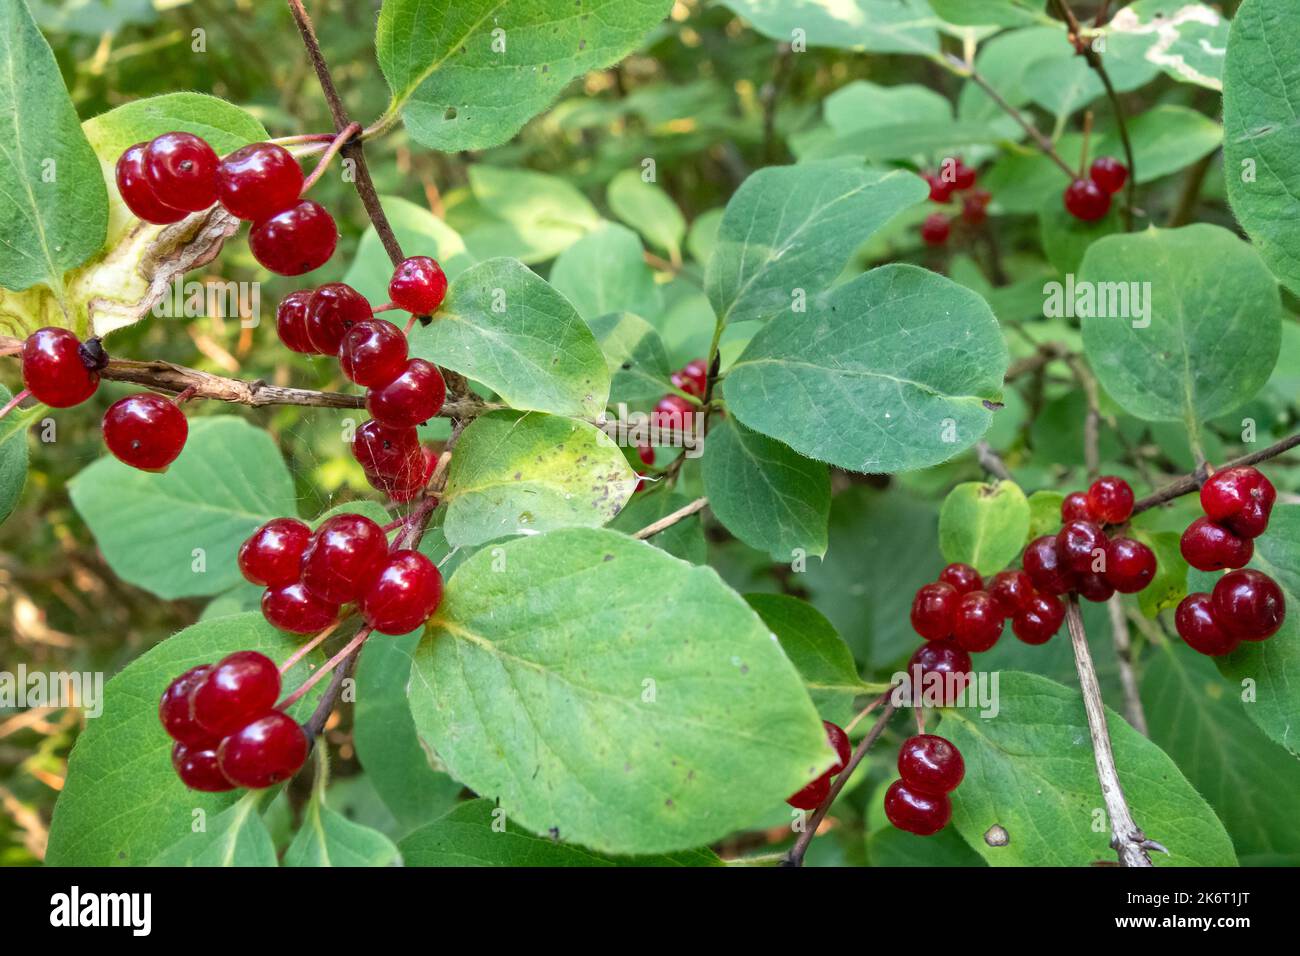 Lonicera xylosteum dangerous wild poisonous plant with poisonous fruits and seeds Stock Photo